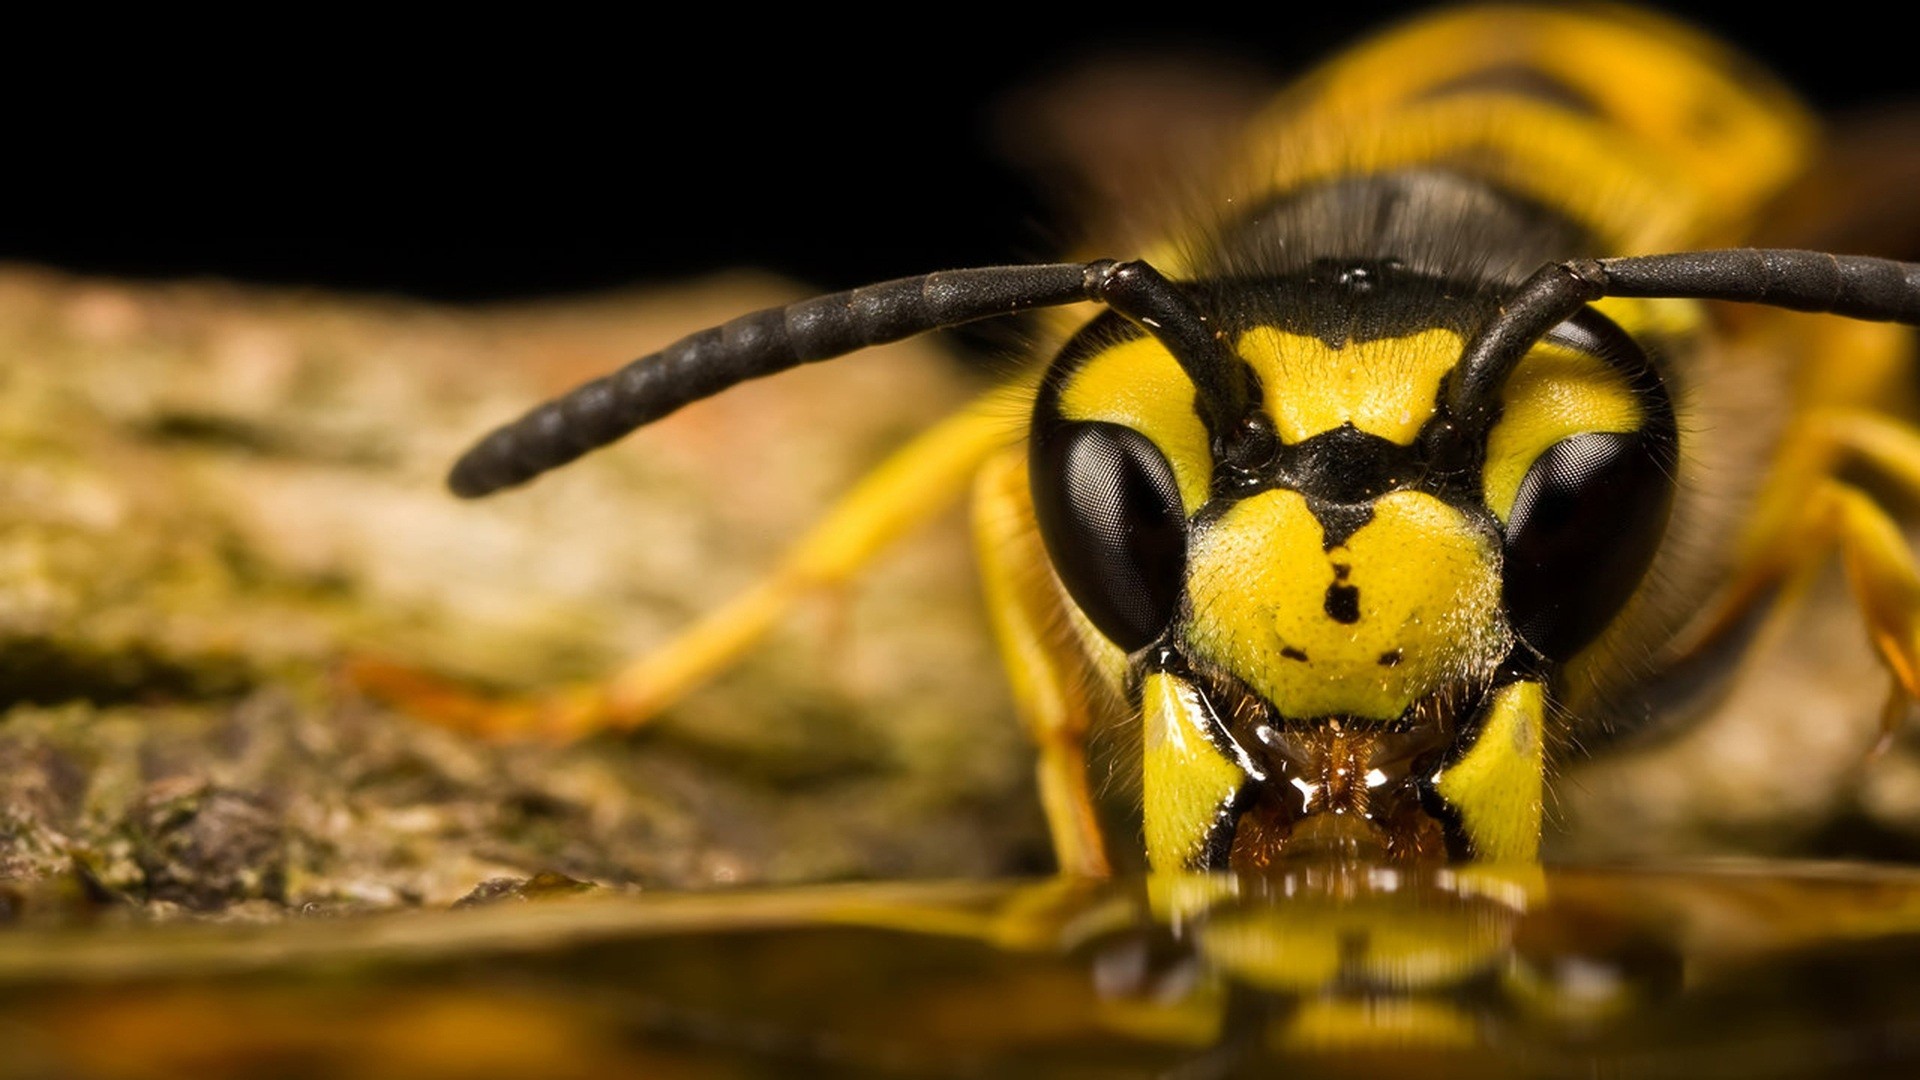 General 1920x1080 animals insect wasps yellow macro